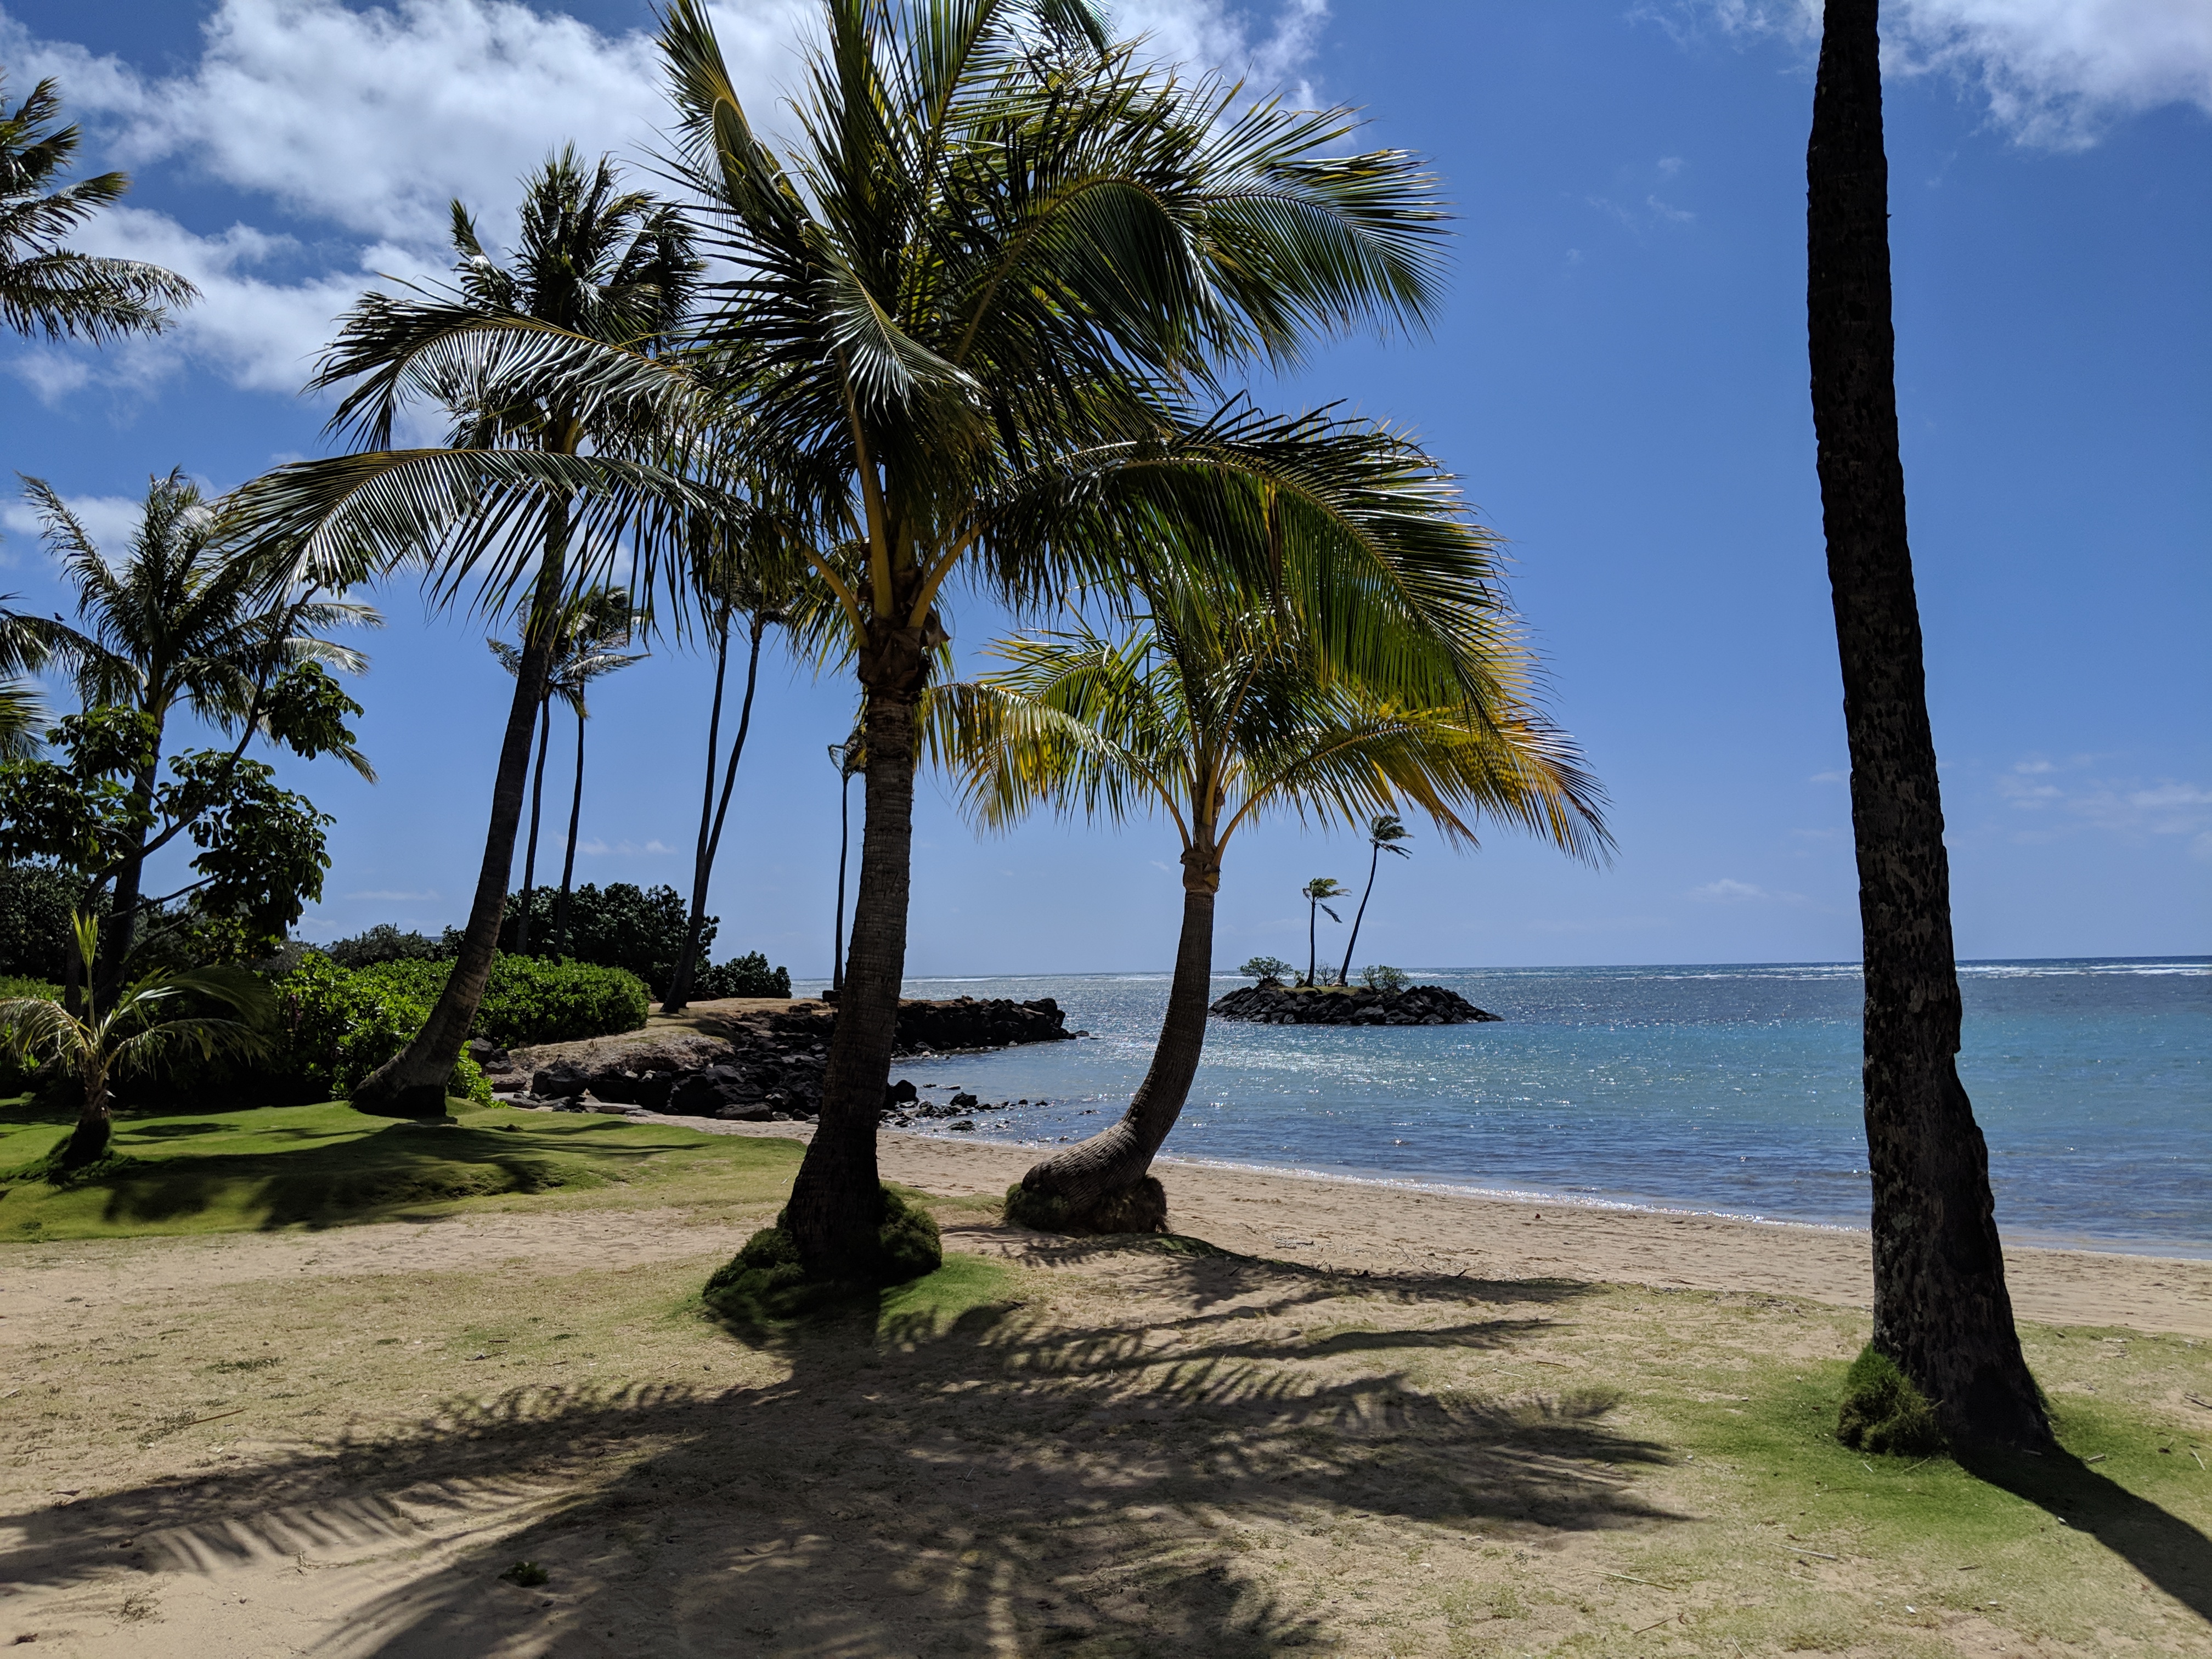 Hawaii Vacation Pt. 2 – Oahu (The Gathering Place)